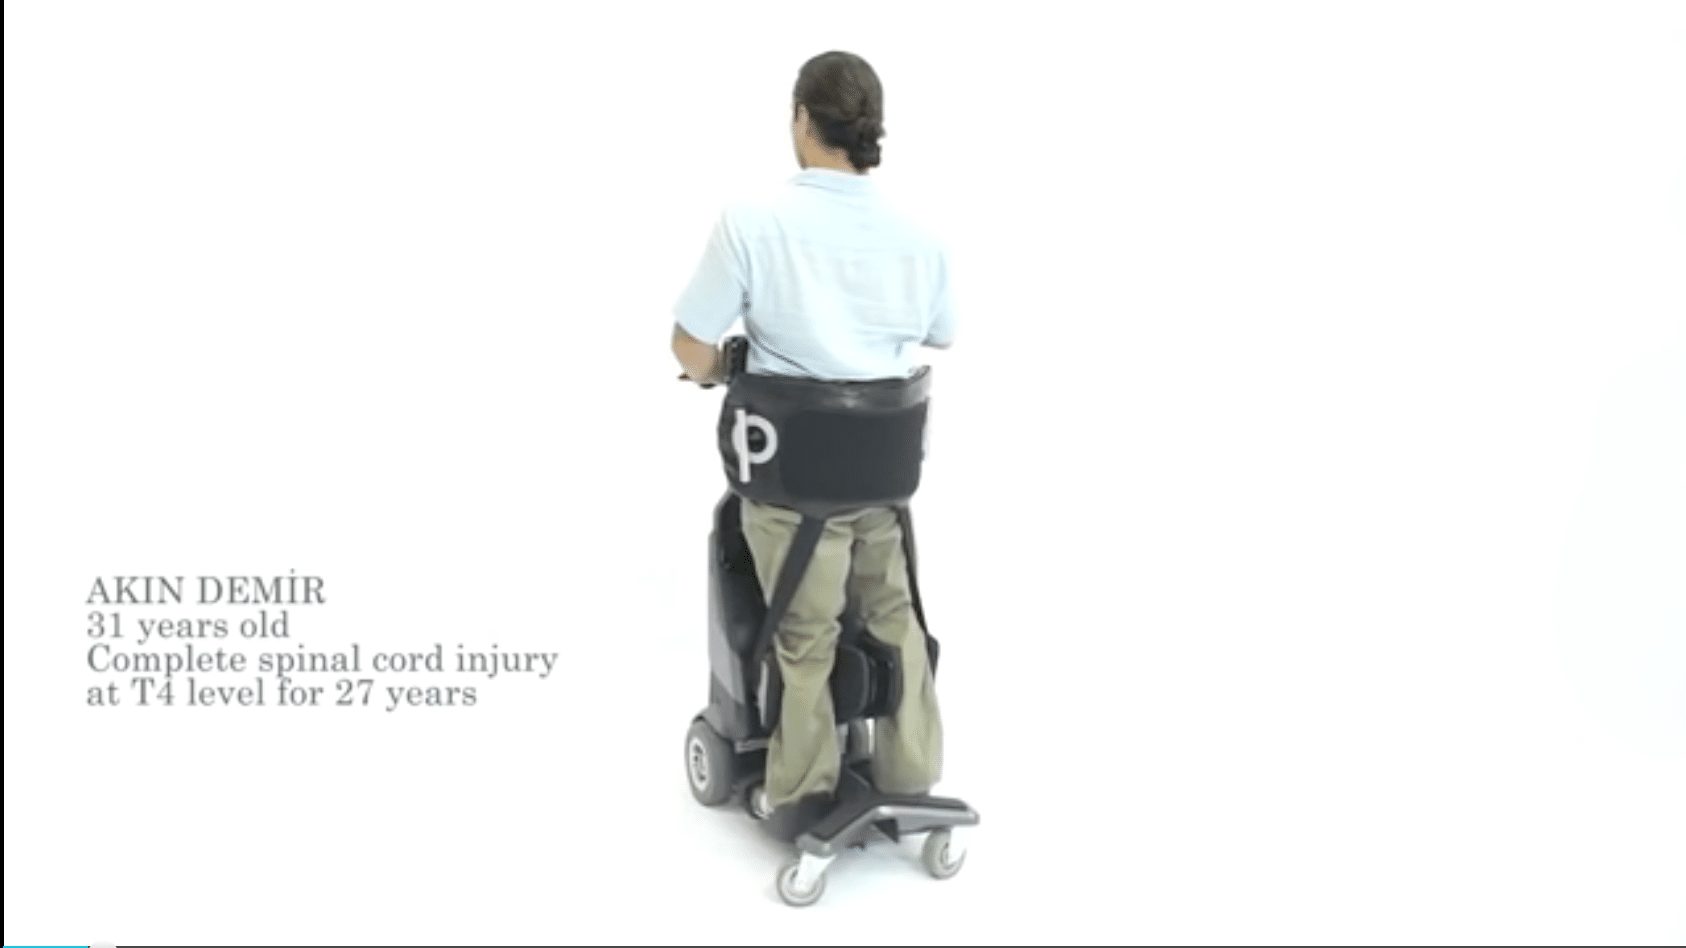 New Robotics Technology Brings Standing and Mobility to Wheelchair Users